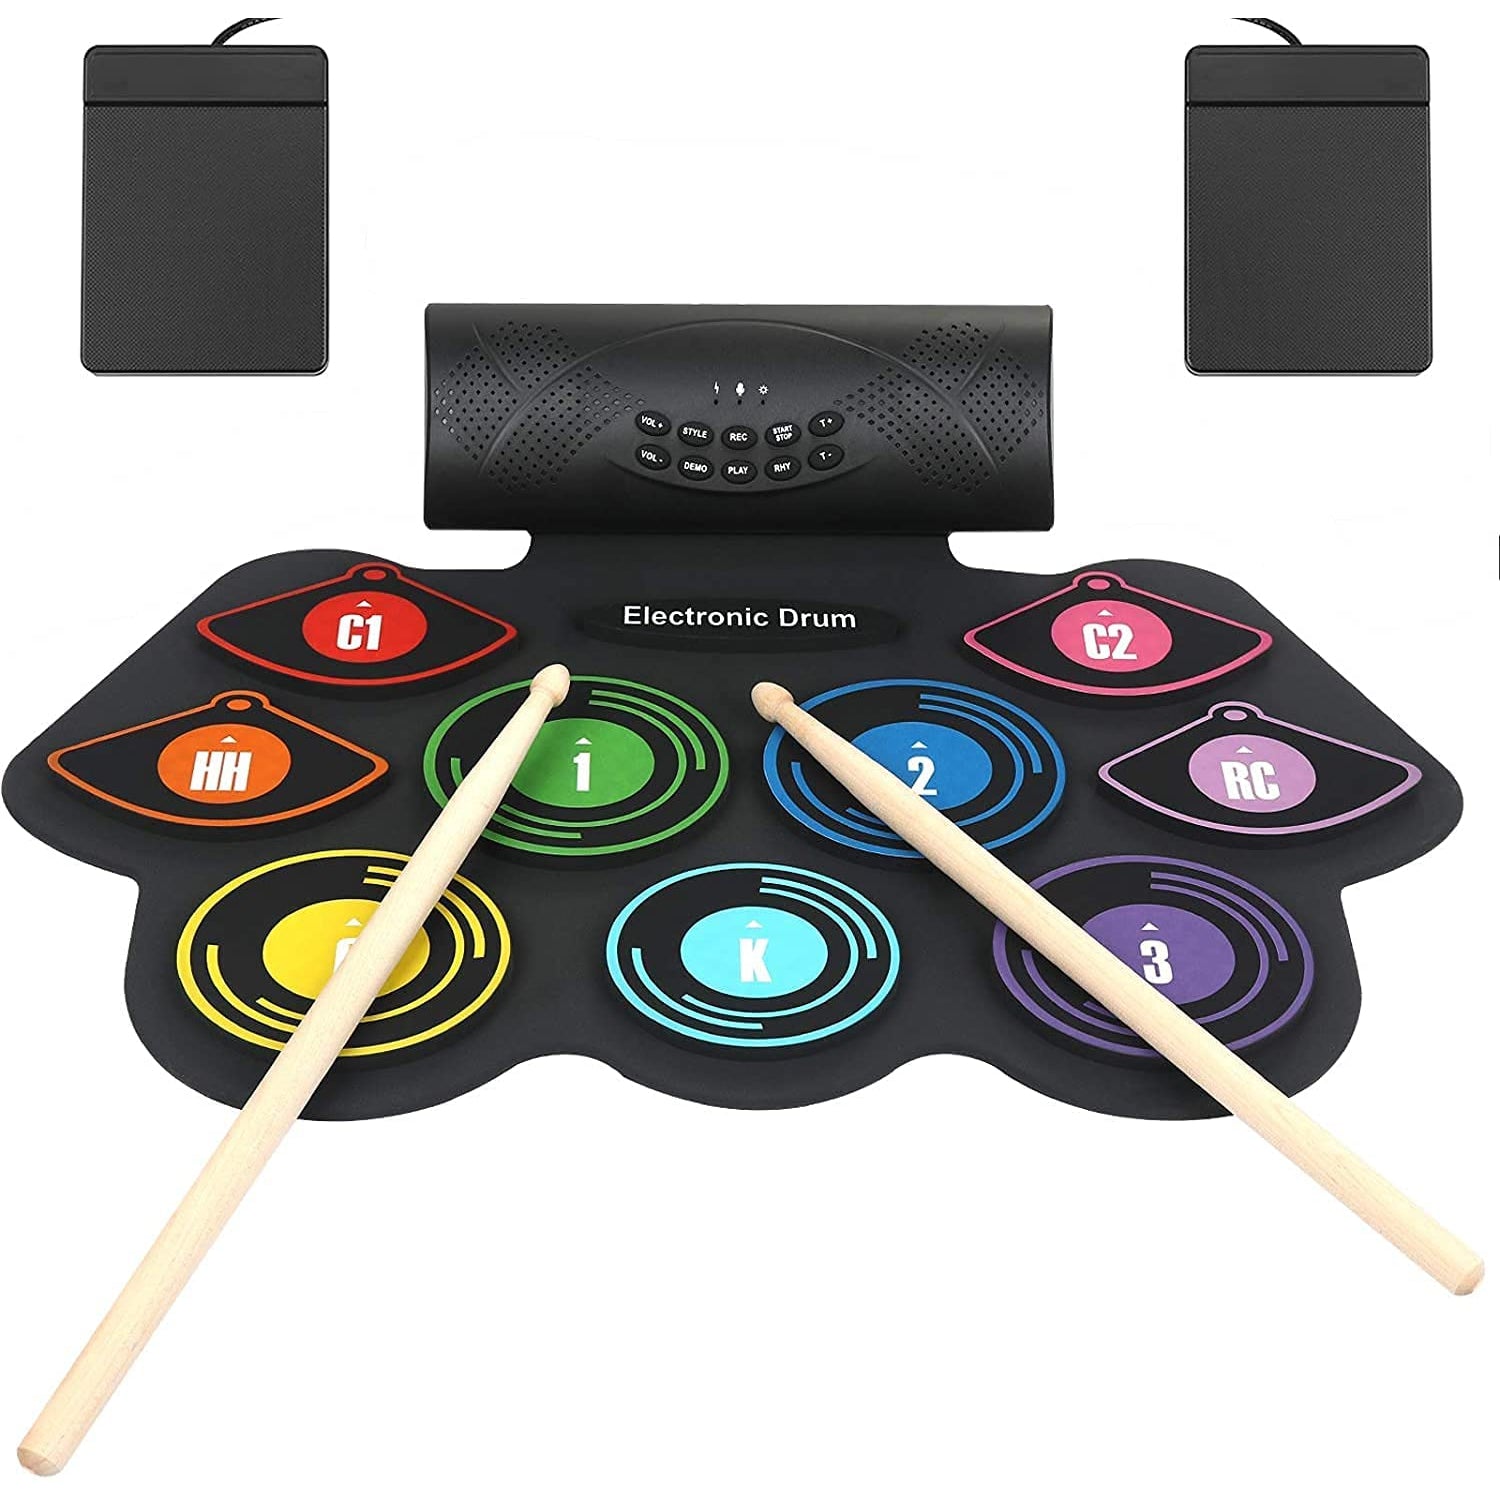 Anpro Portable E-Drum 9 Pads with Built-in Speakers